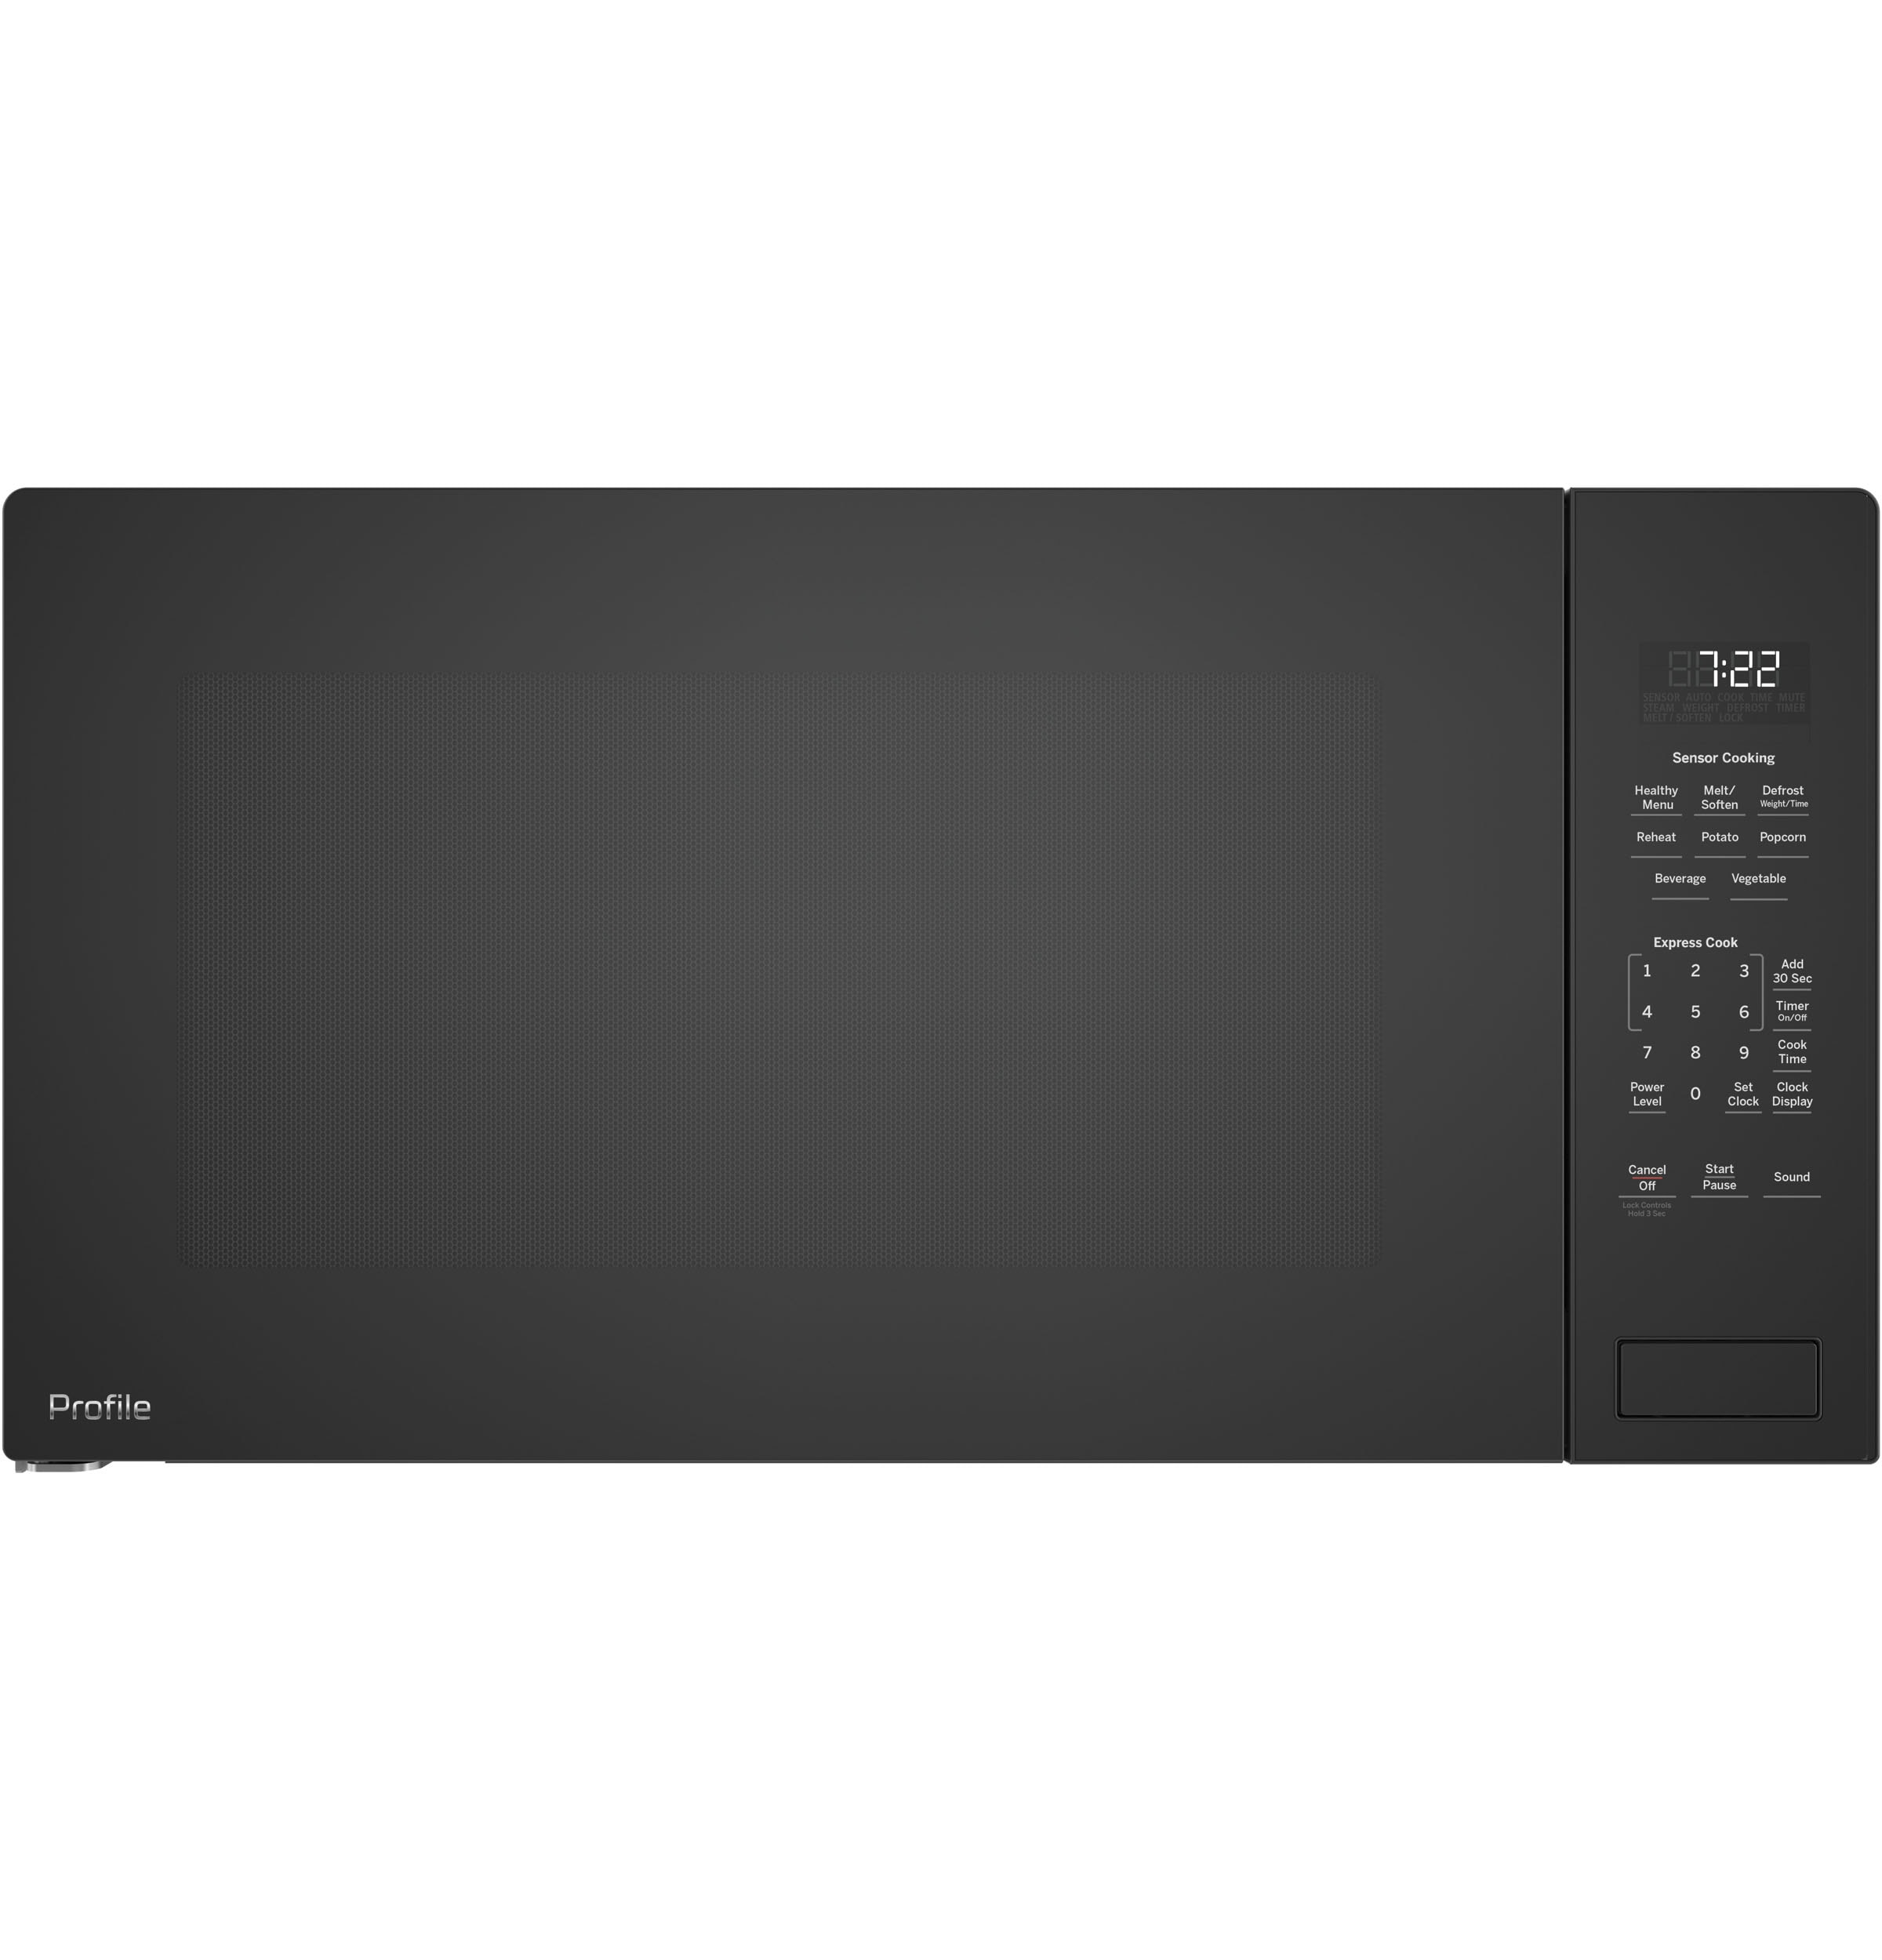 PEB7227BLTS  GE Profile 24 Built-In/Countertop 2.2 cu. ft. 1100 W  Microwave - Black Stainless